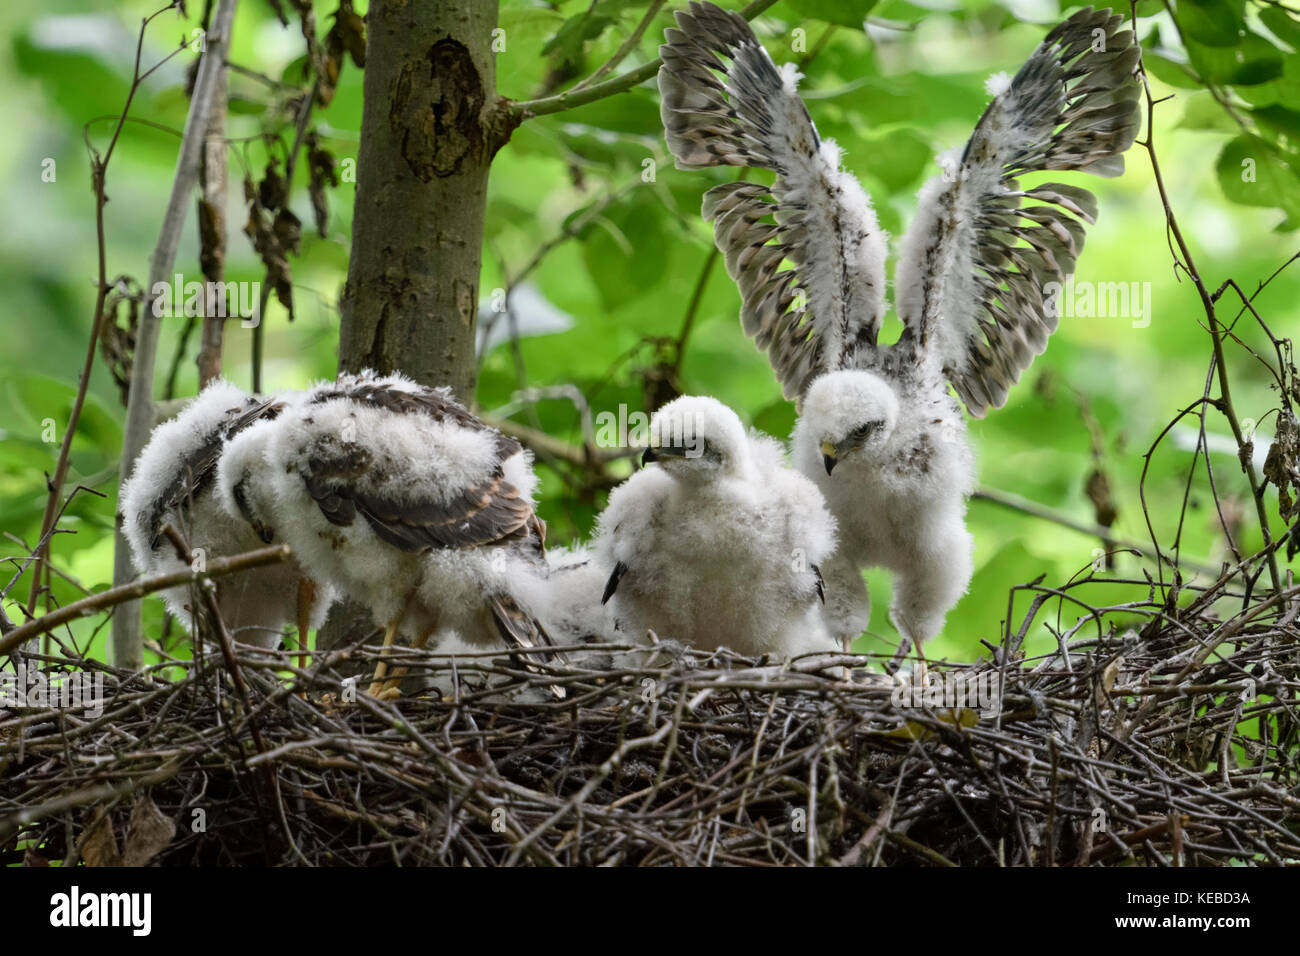 Sparrowhawk / Sperber ( Accipiter nisus ), moulting grown up chicks in nest, training their skills and strength, wildlife, Europe. Stock Photo